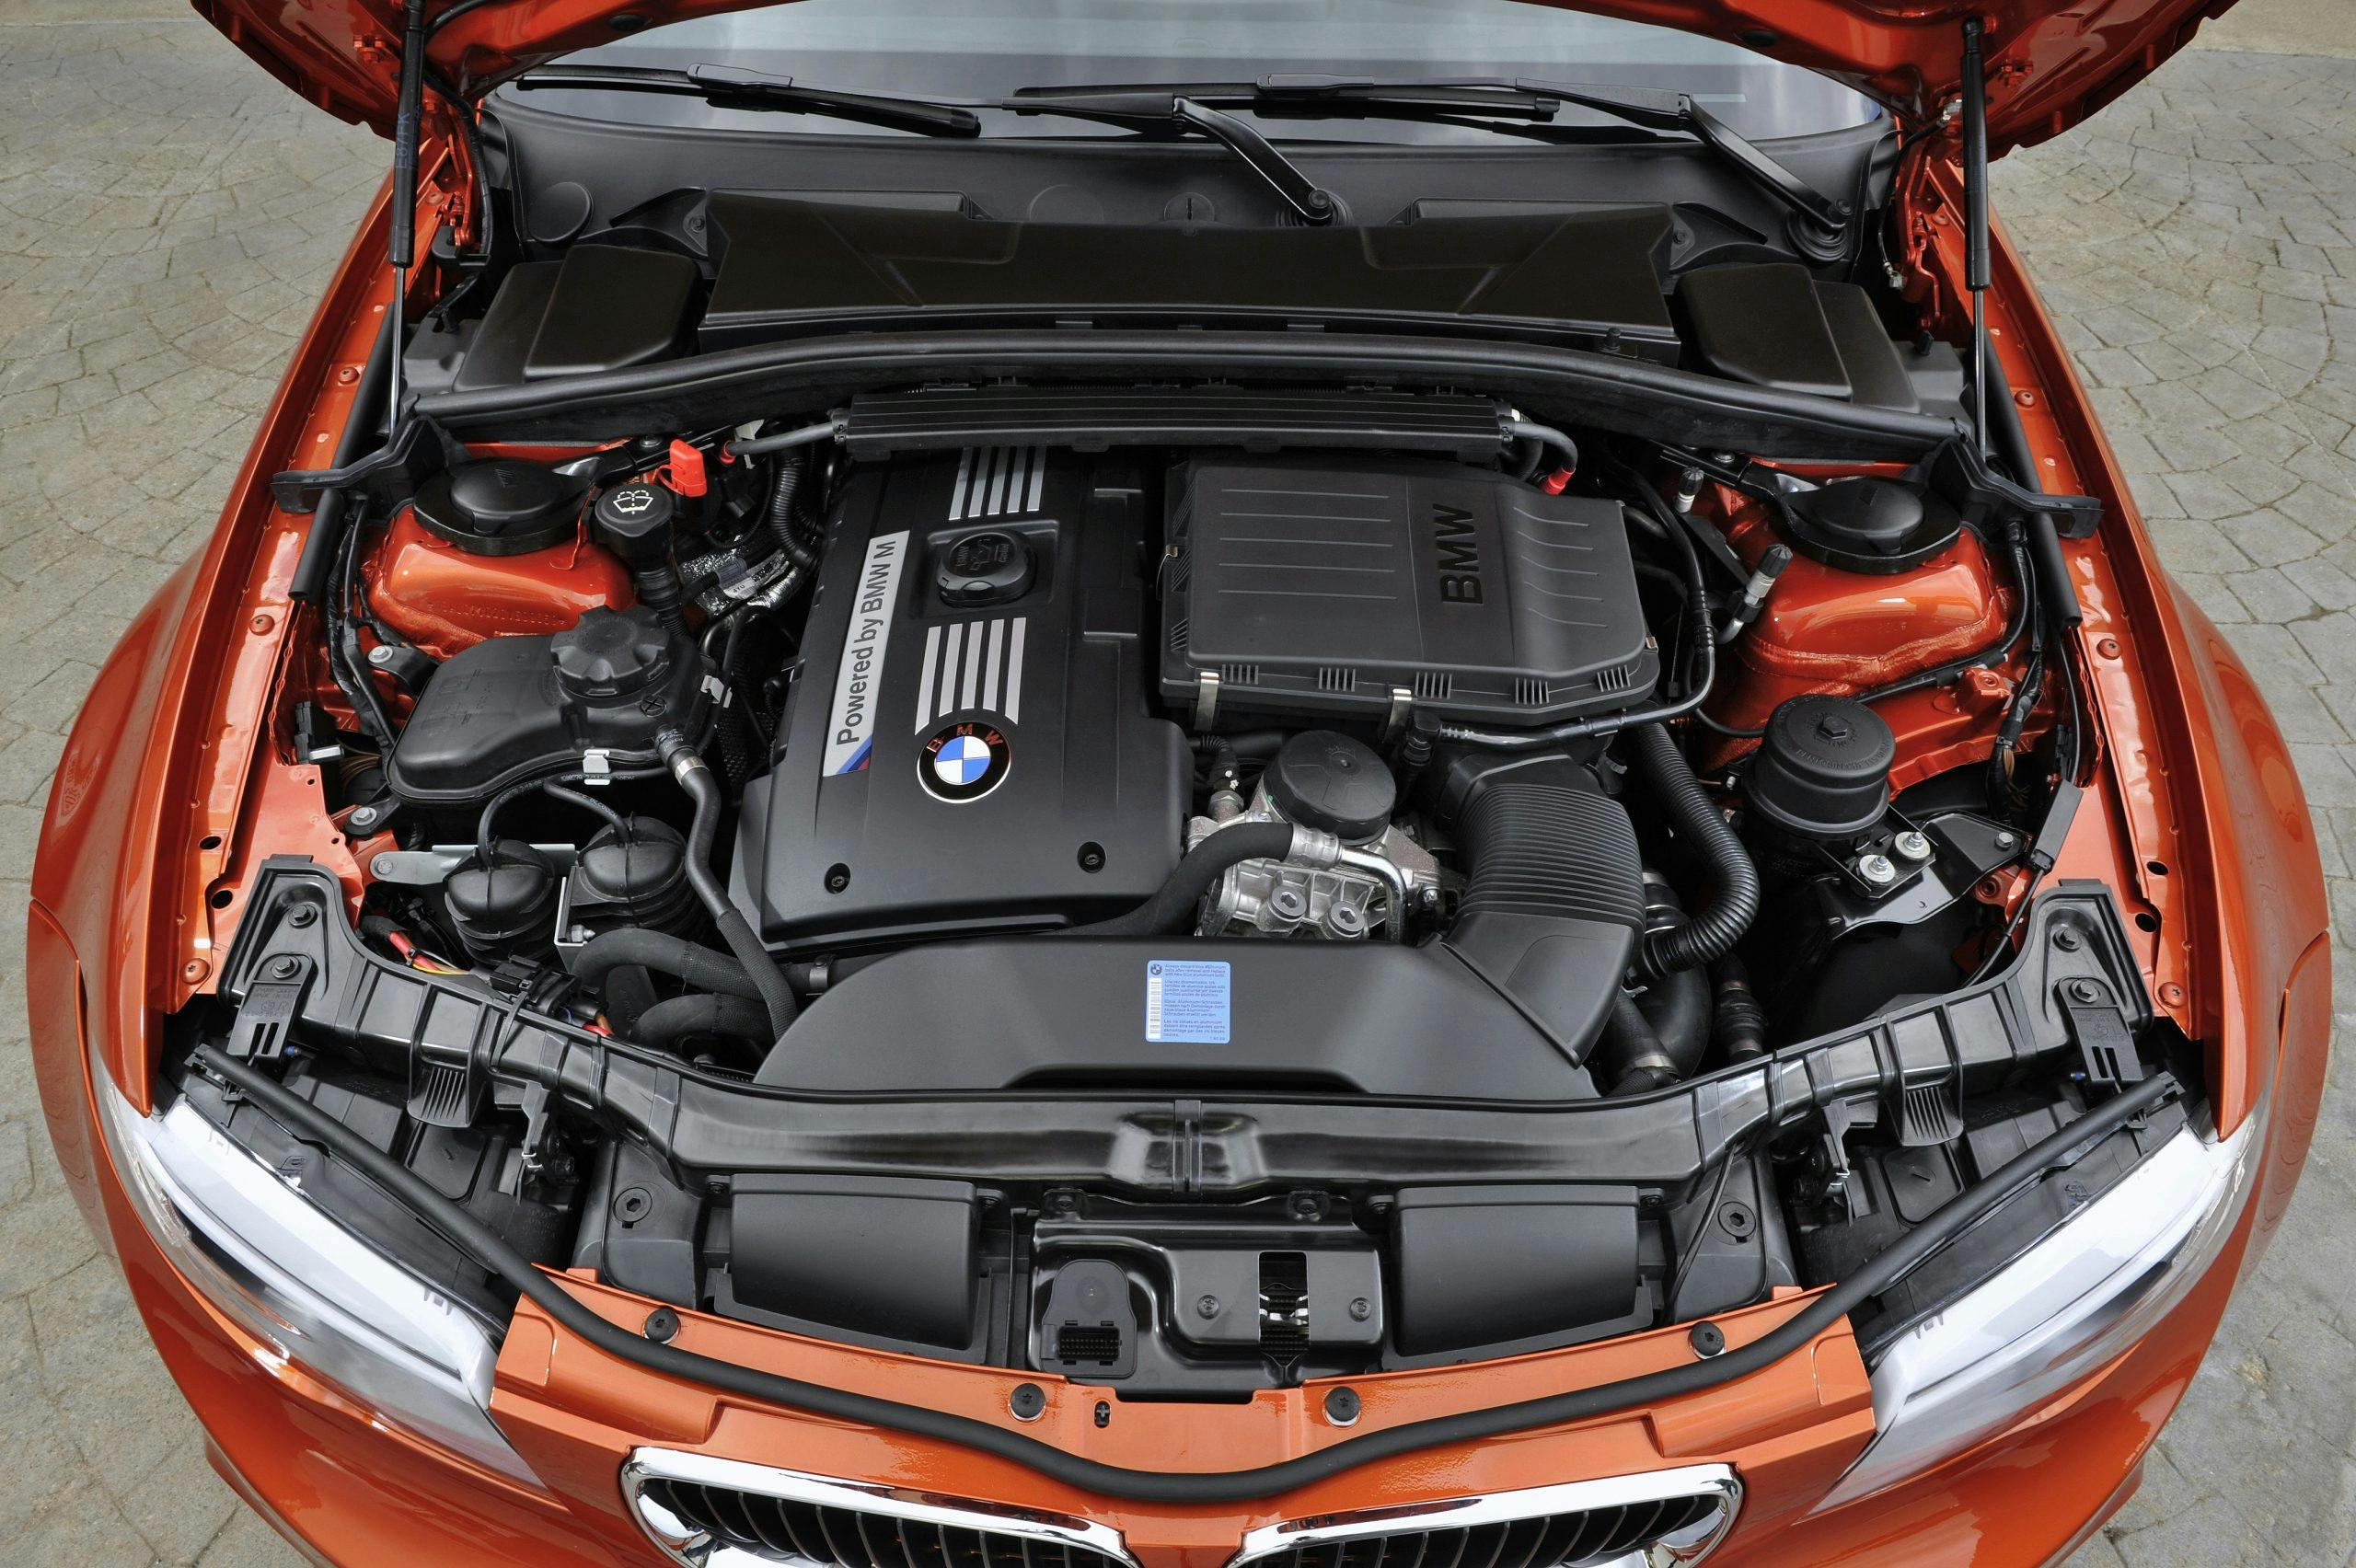 BMW 1 Series M Coupe engine bay